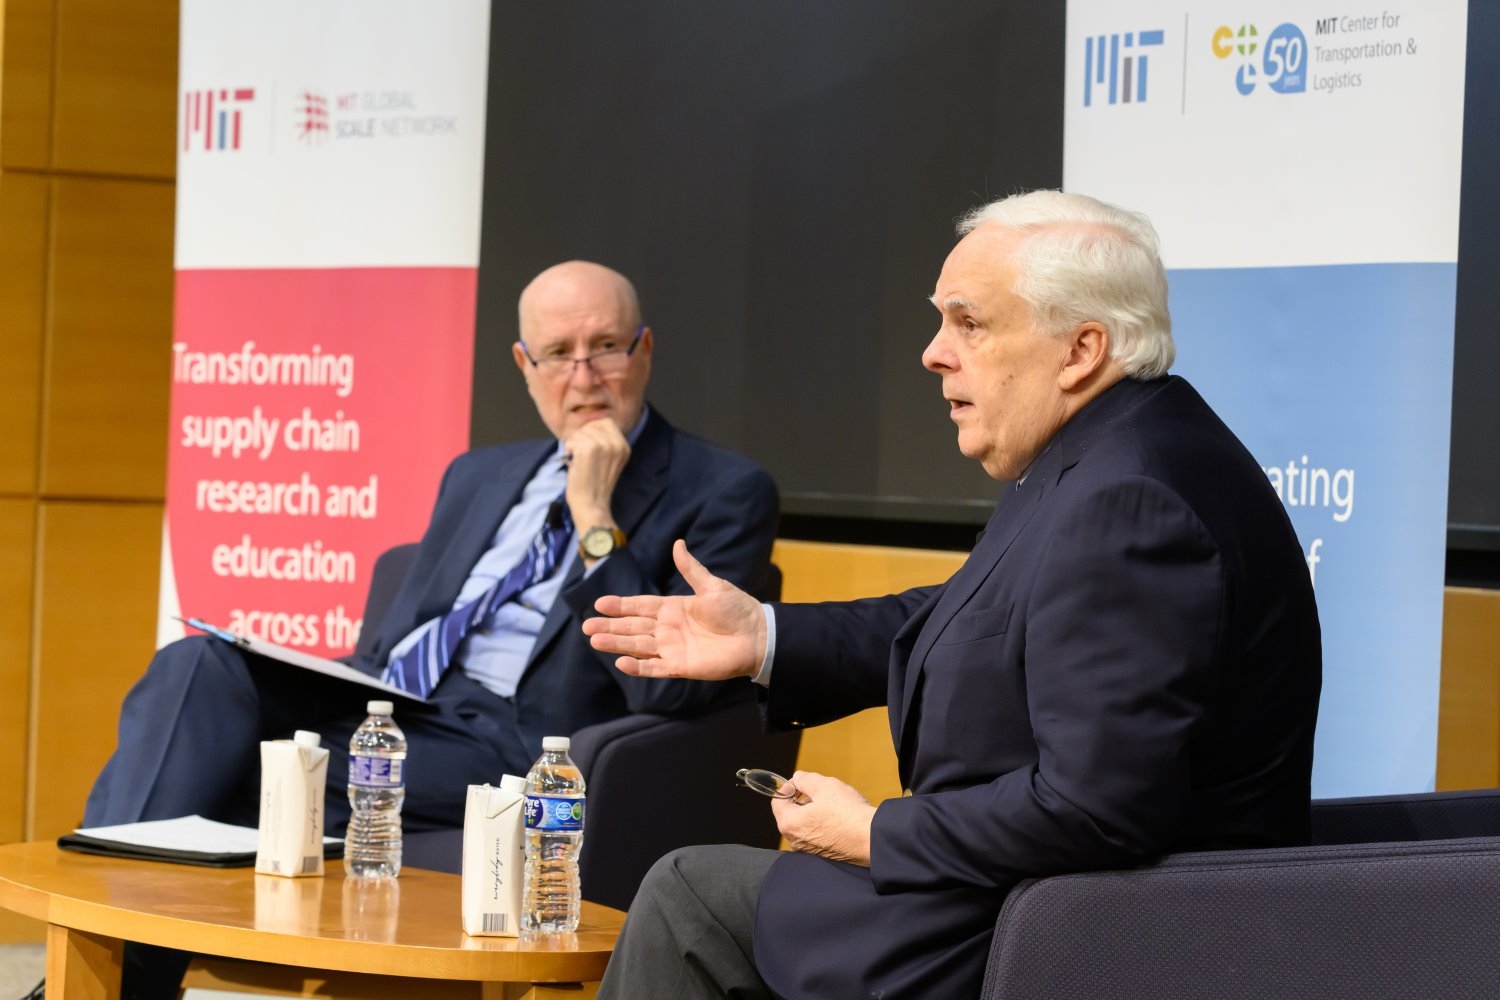 In visit to MIT, FedEx founder Frederick Smith shares thoughts on innovation